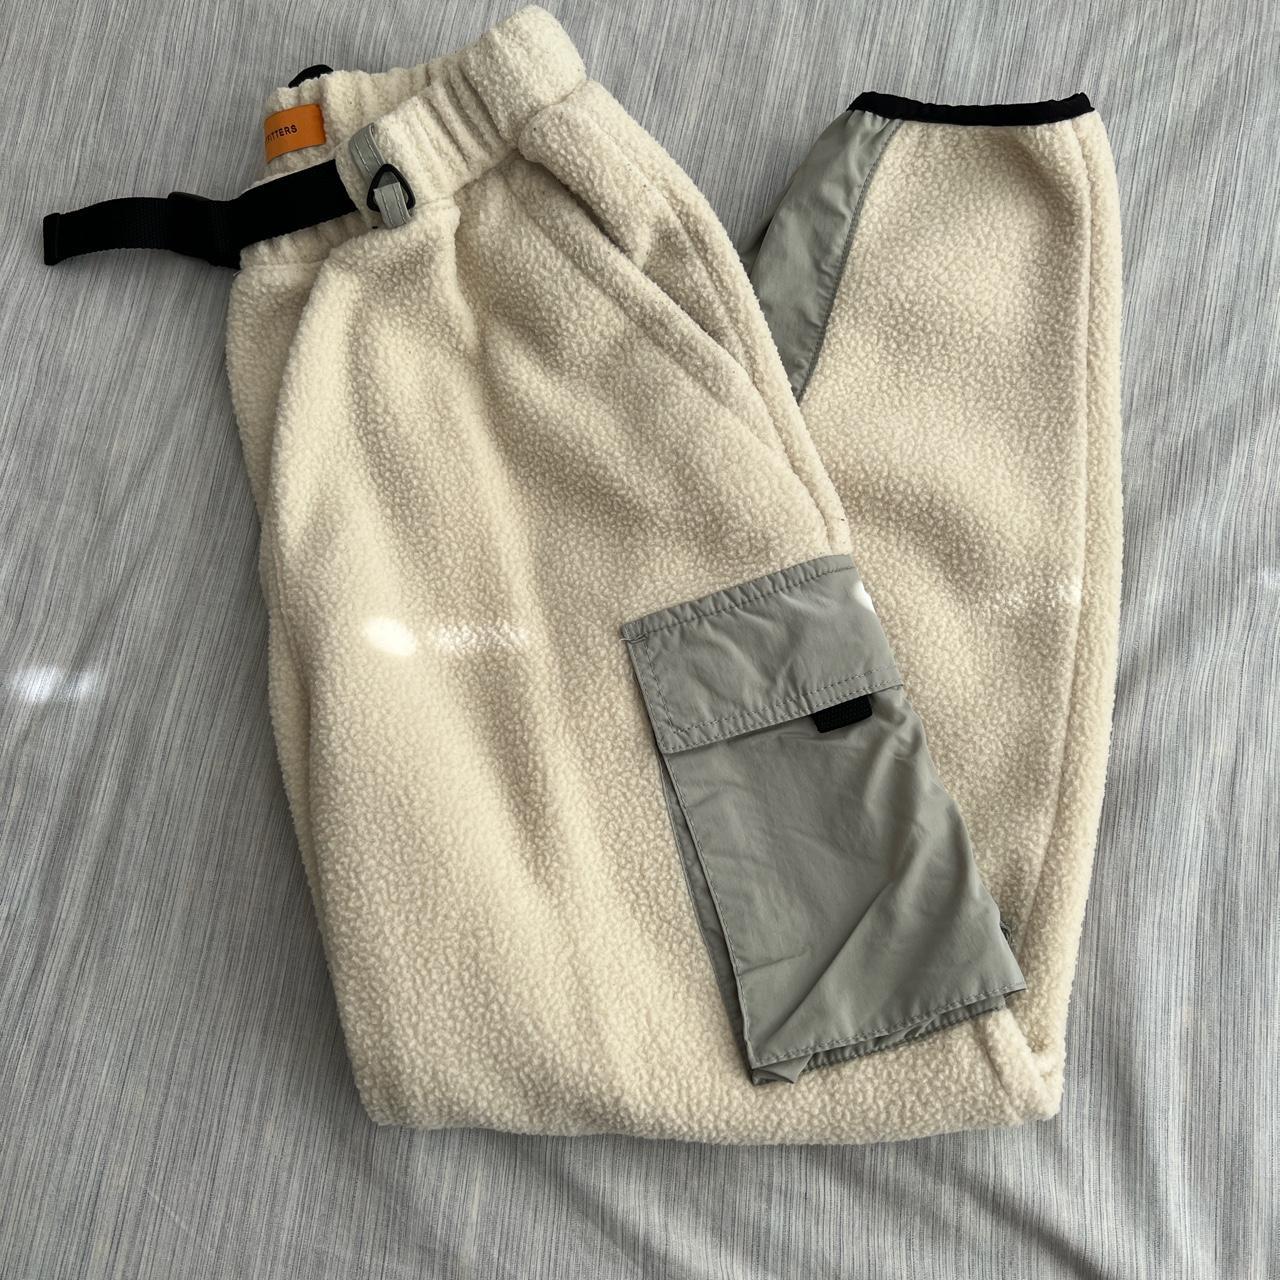 Urban outfitters men’s pants Color is more... - Depop